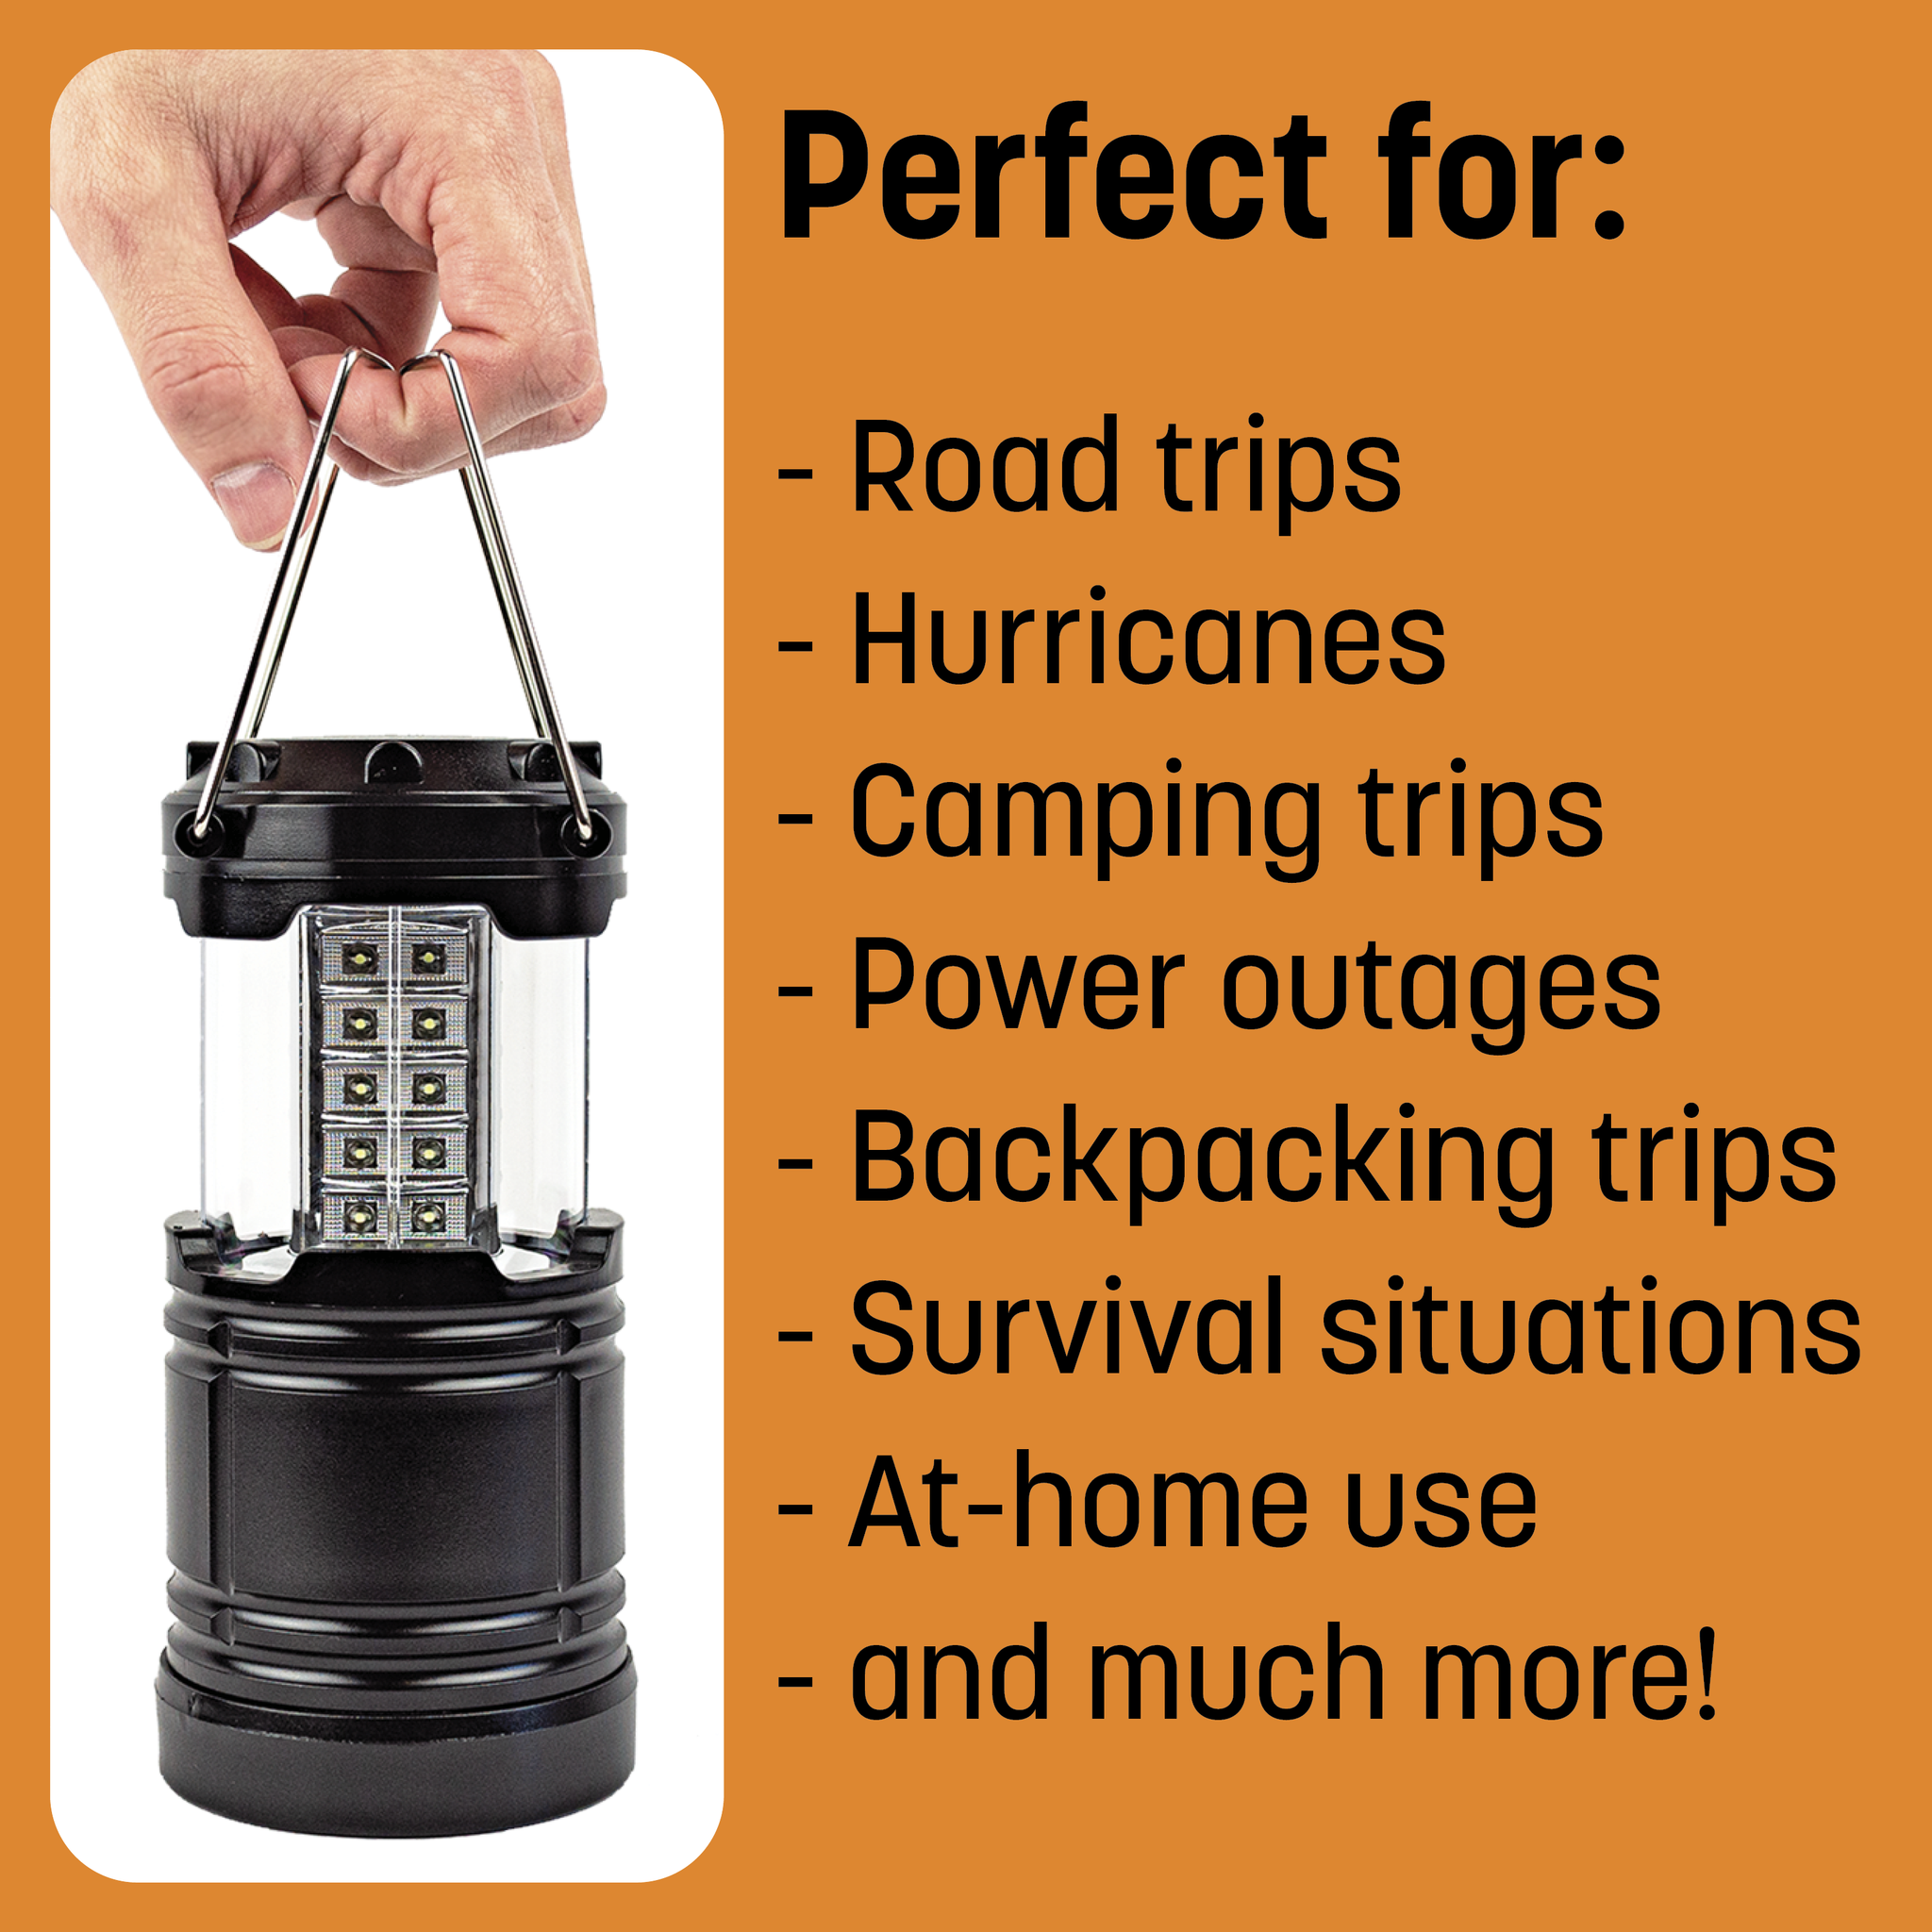 2 Pack Portable Outdoor LED Lantern Camping Lanterns, Water Resistant Emergency Tent Light for Backpacking, Hiking, Fishing